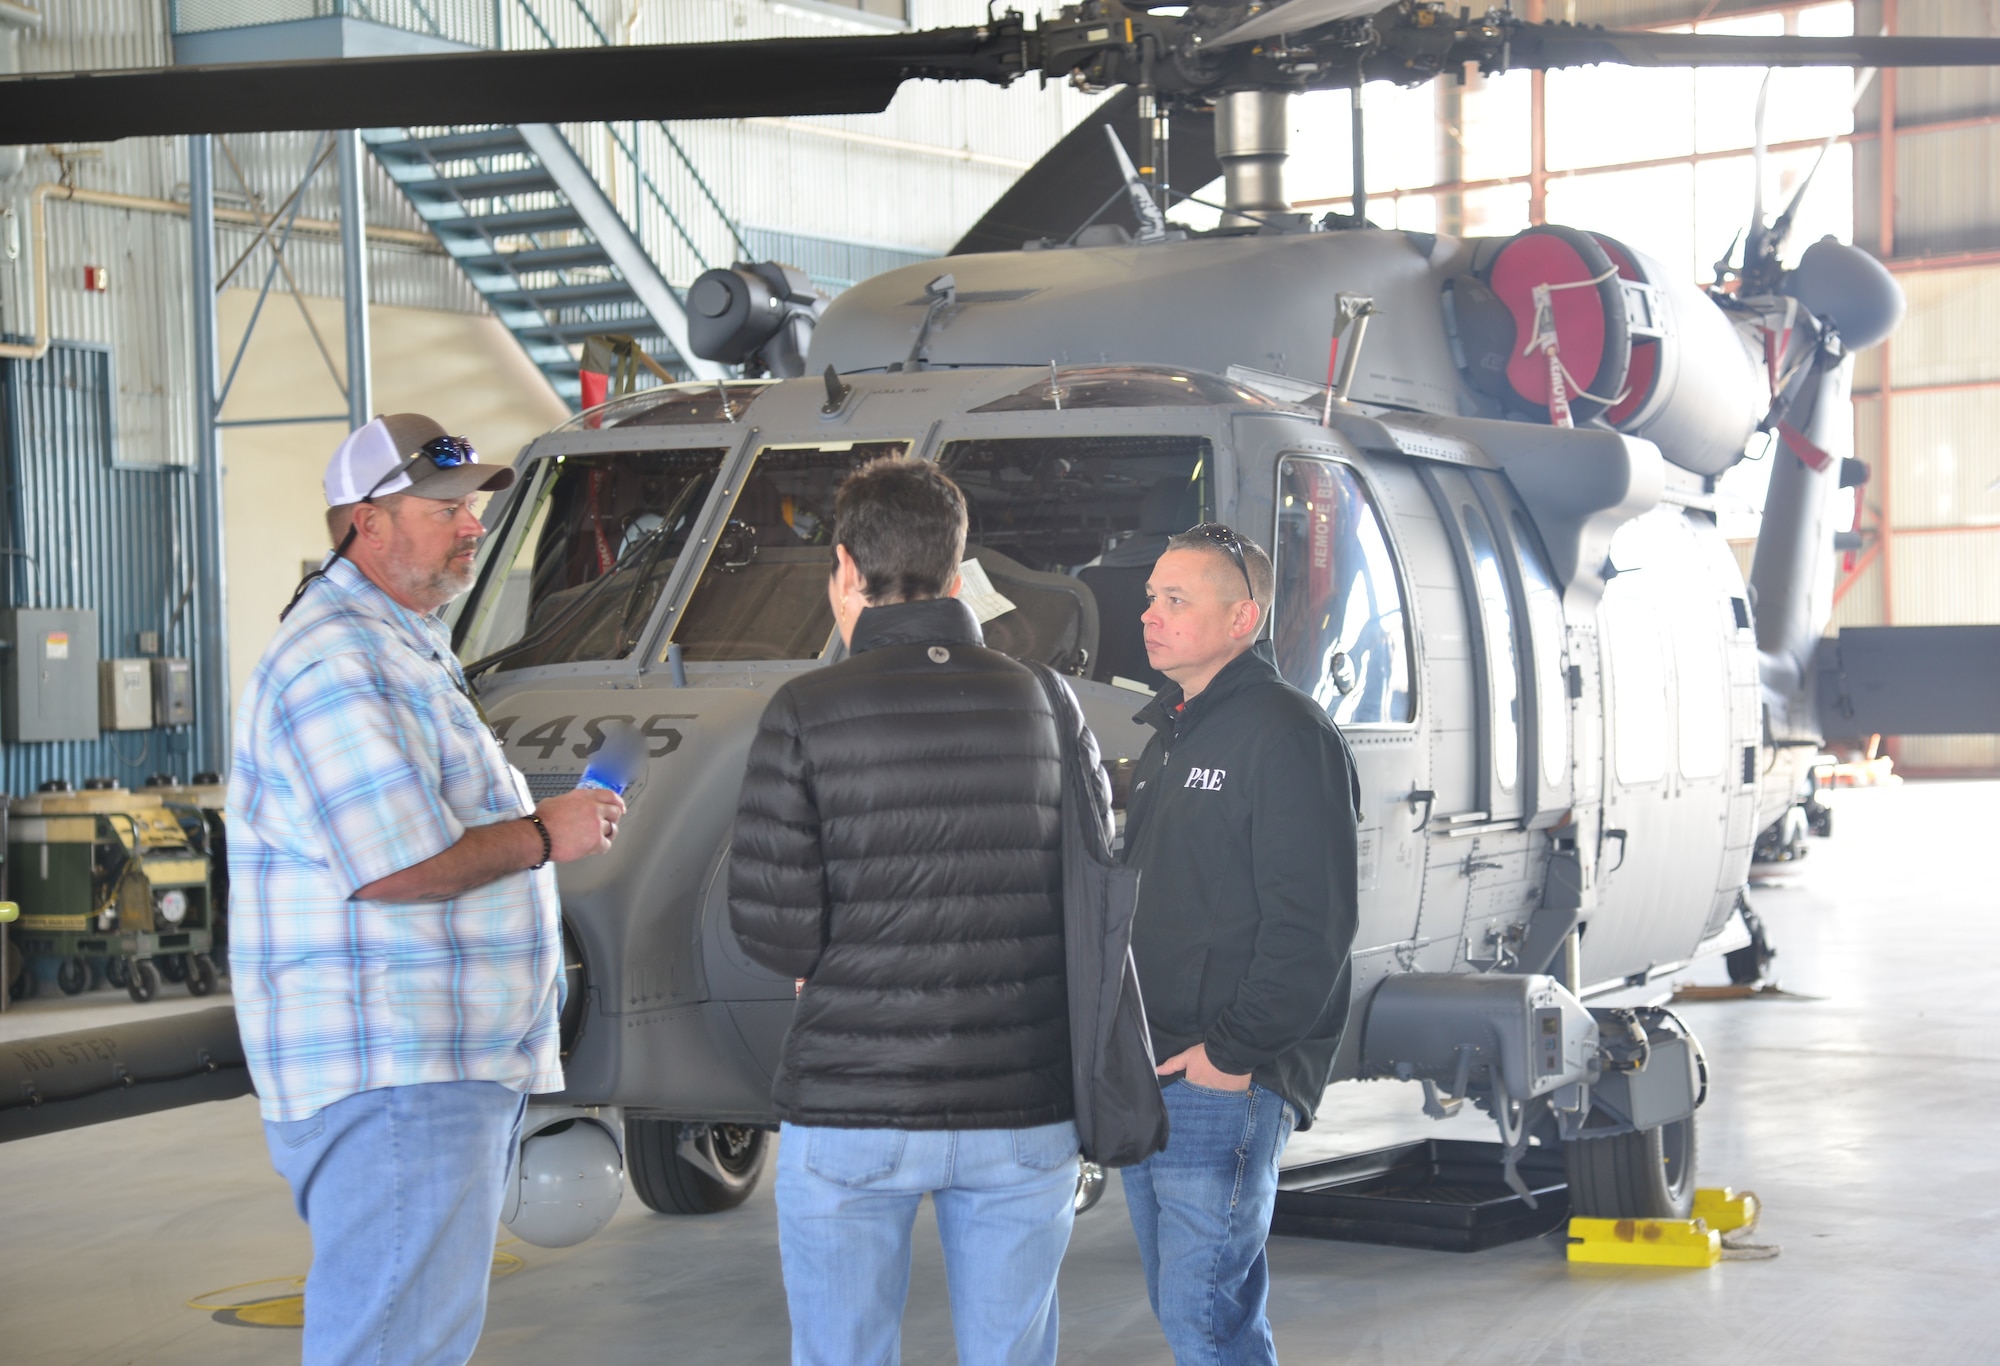 Vertical Magazine discussed maintenance operations at the 512th Rescue Special Squadron